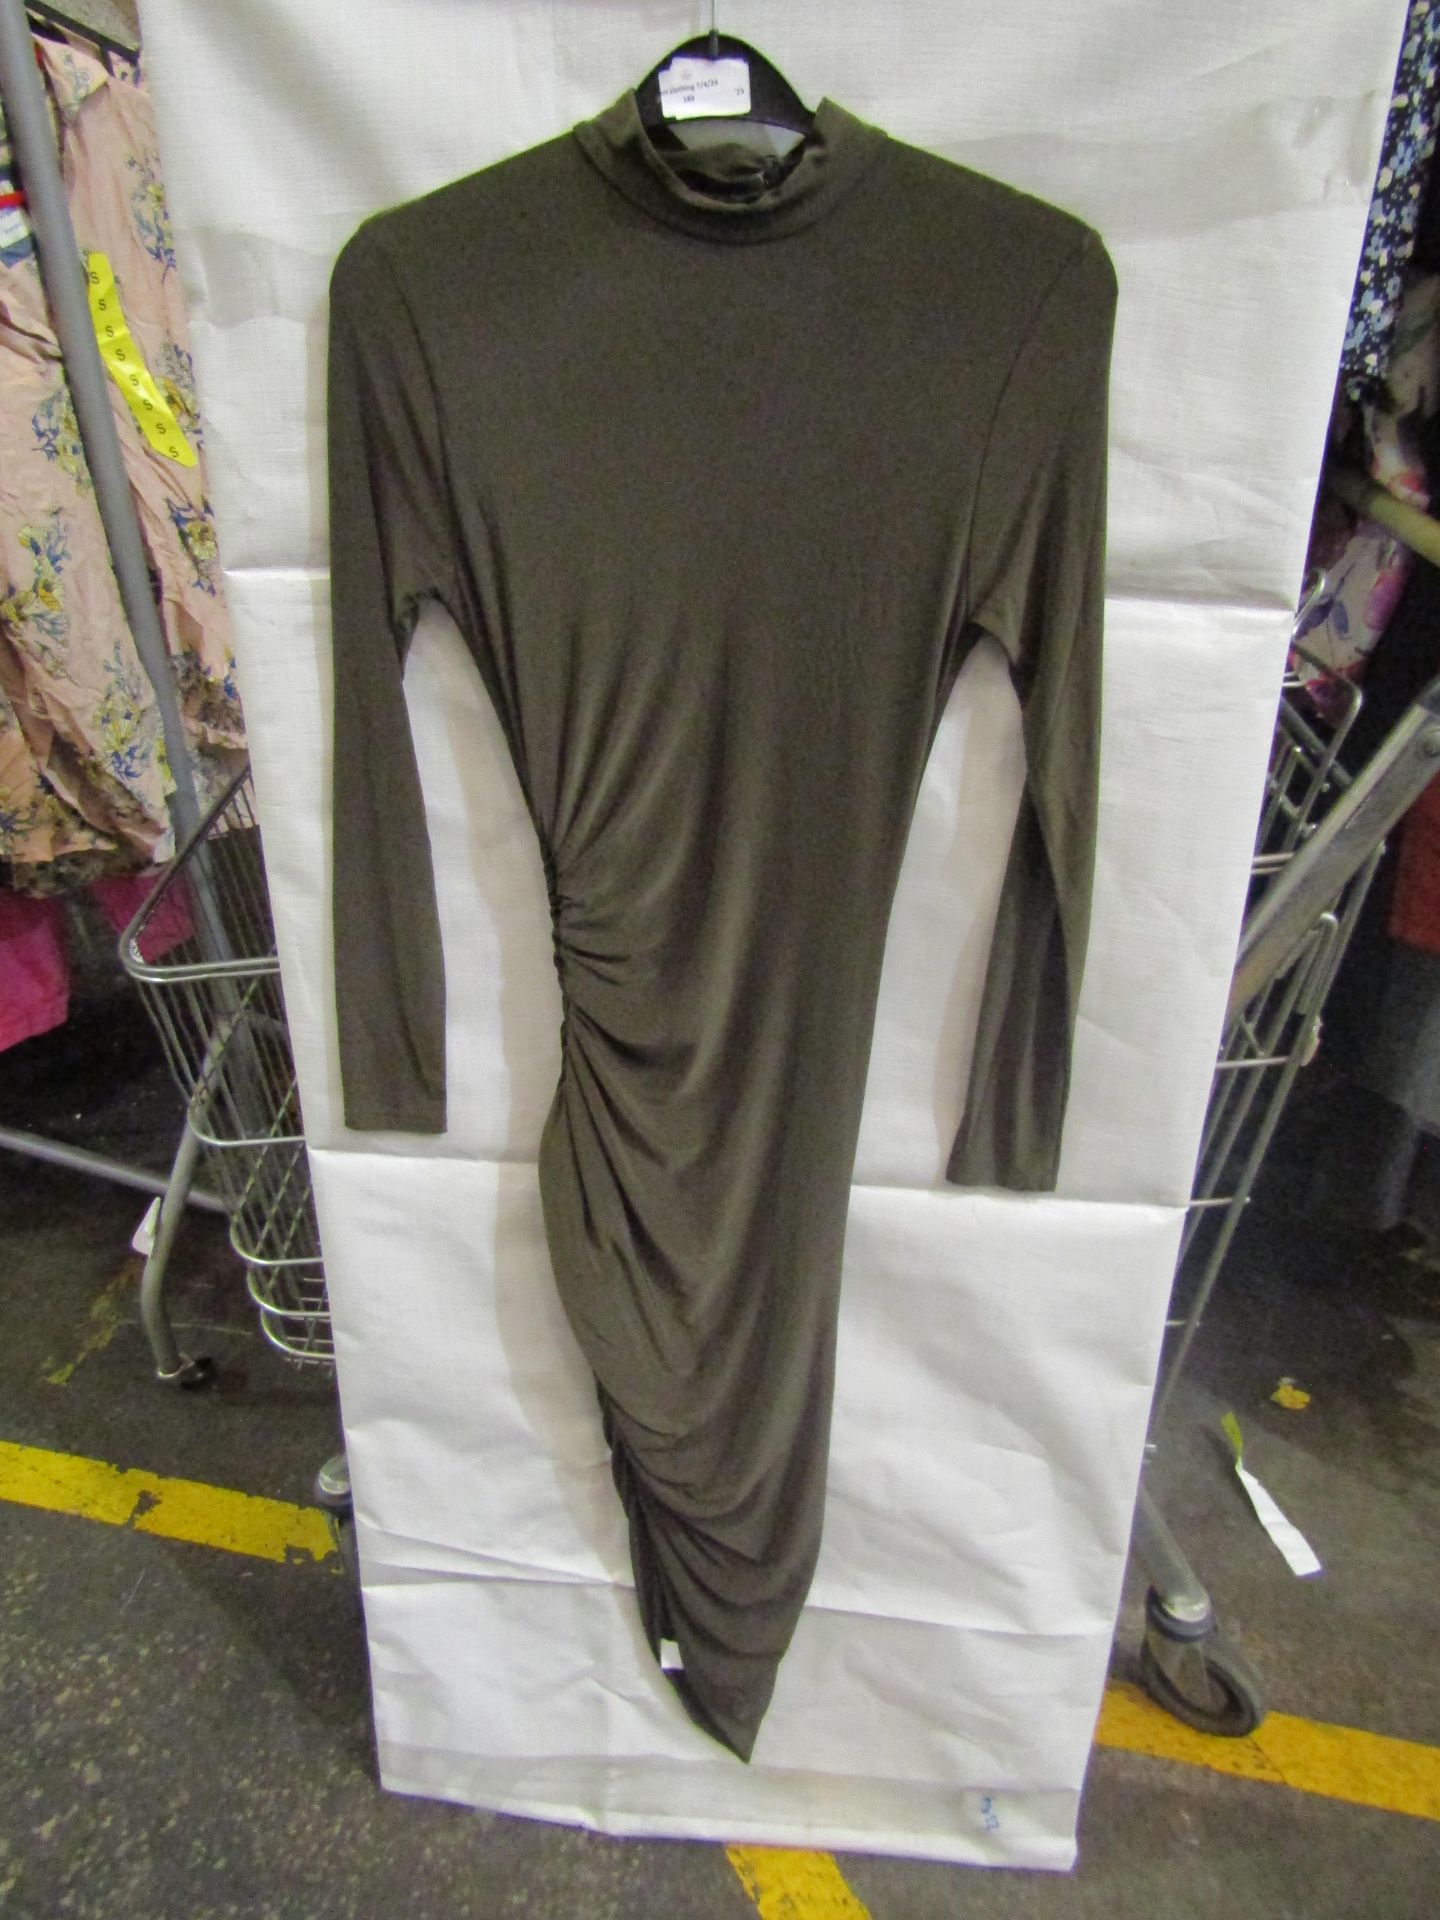 2x Miss Guided - Slinky Rucked Midi Khaki Dress - Size 20 Uk - New With Tags & Packaged. - Image 2 of 2